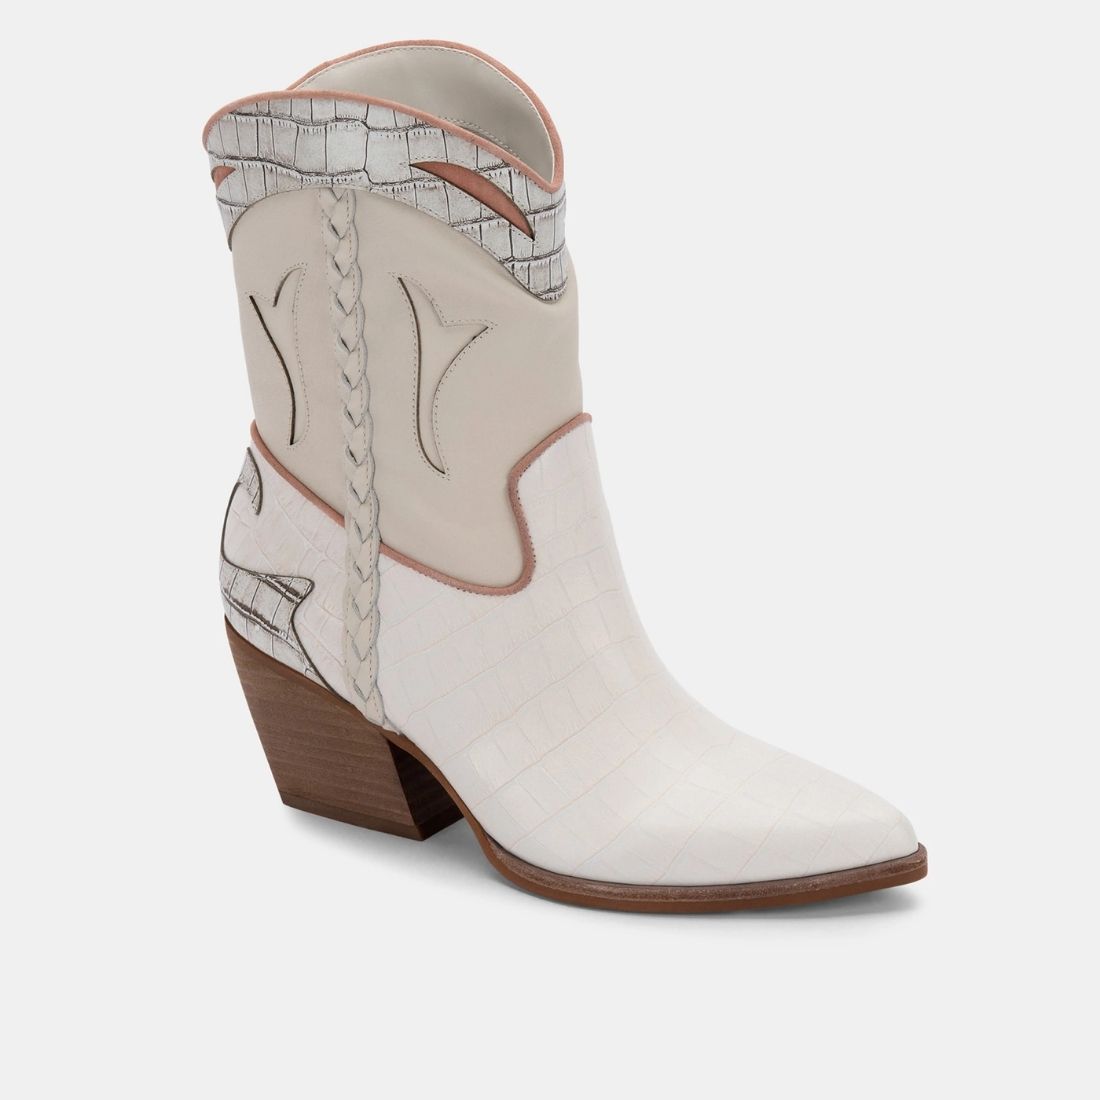 dolce vita loral cowboy boot in ivory croco leather 108257